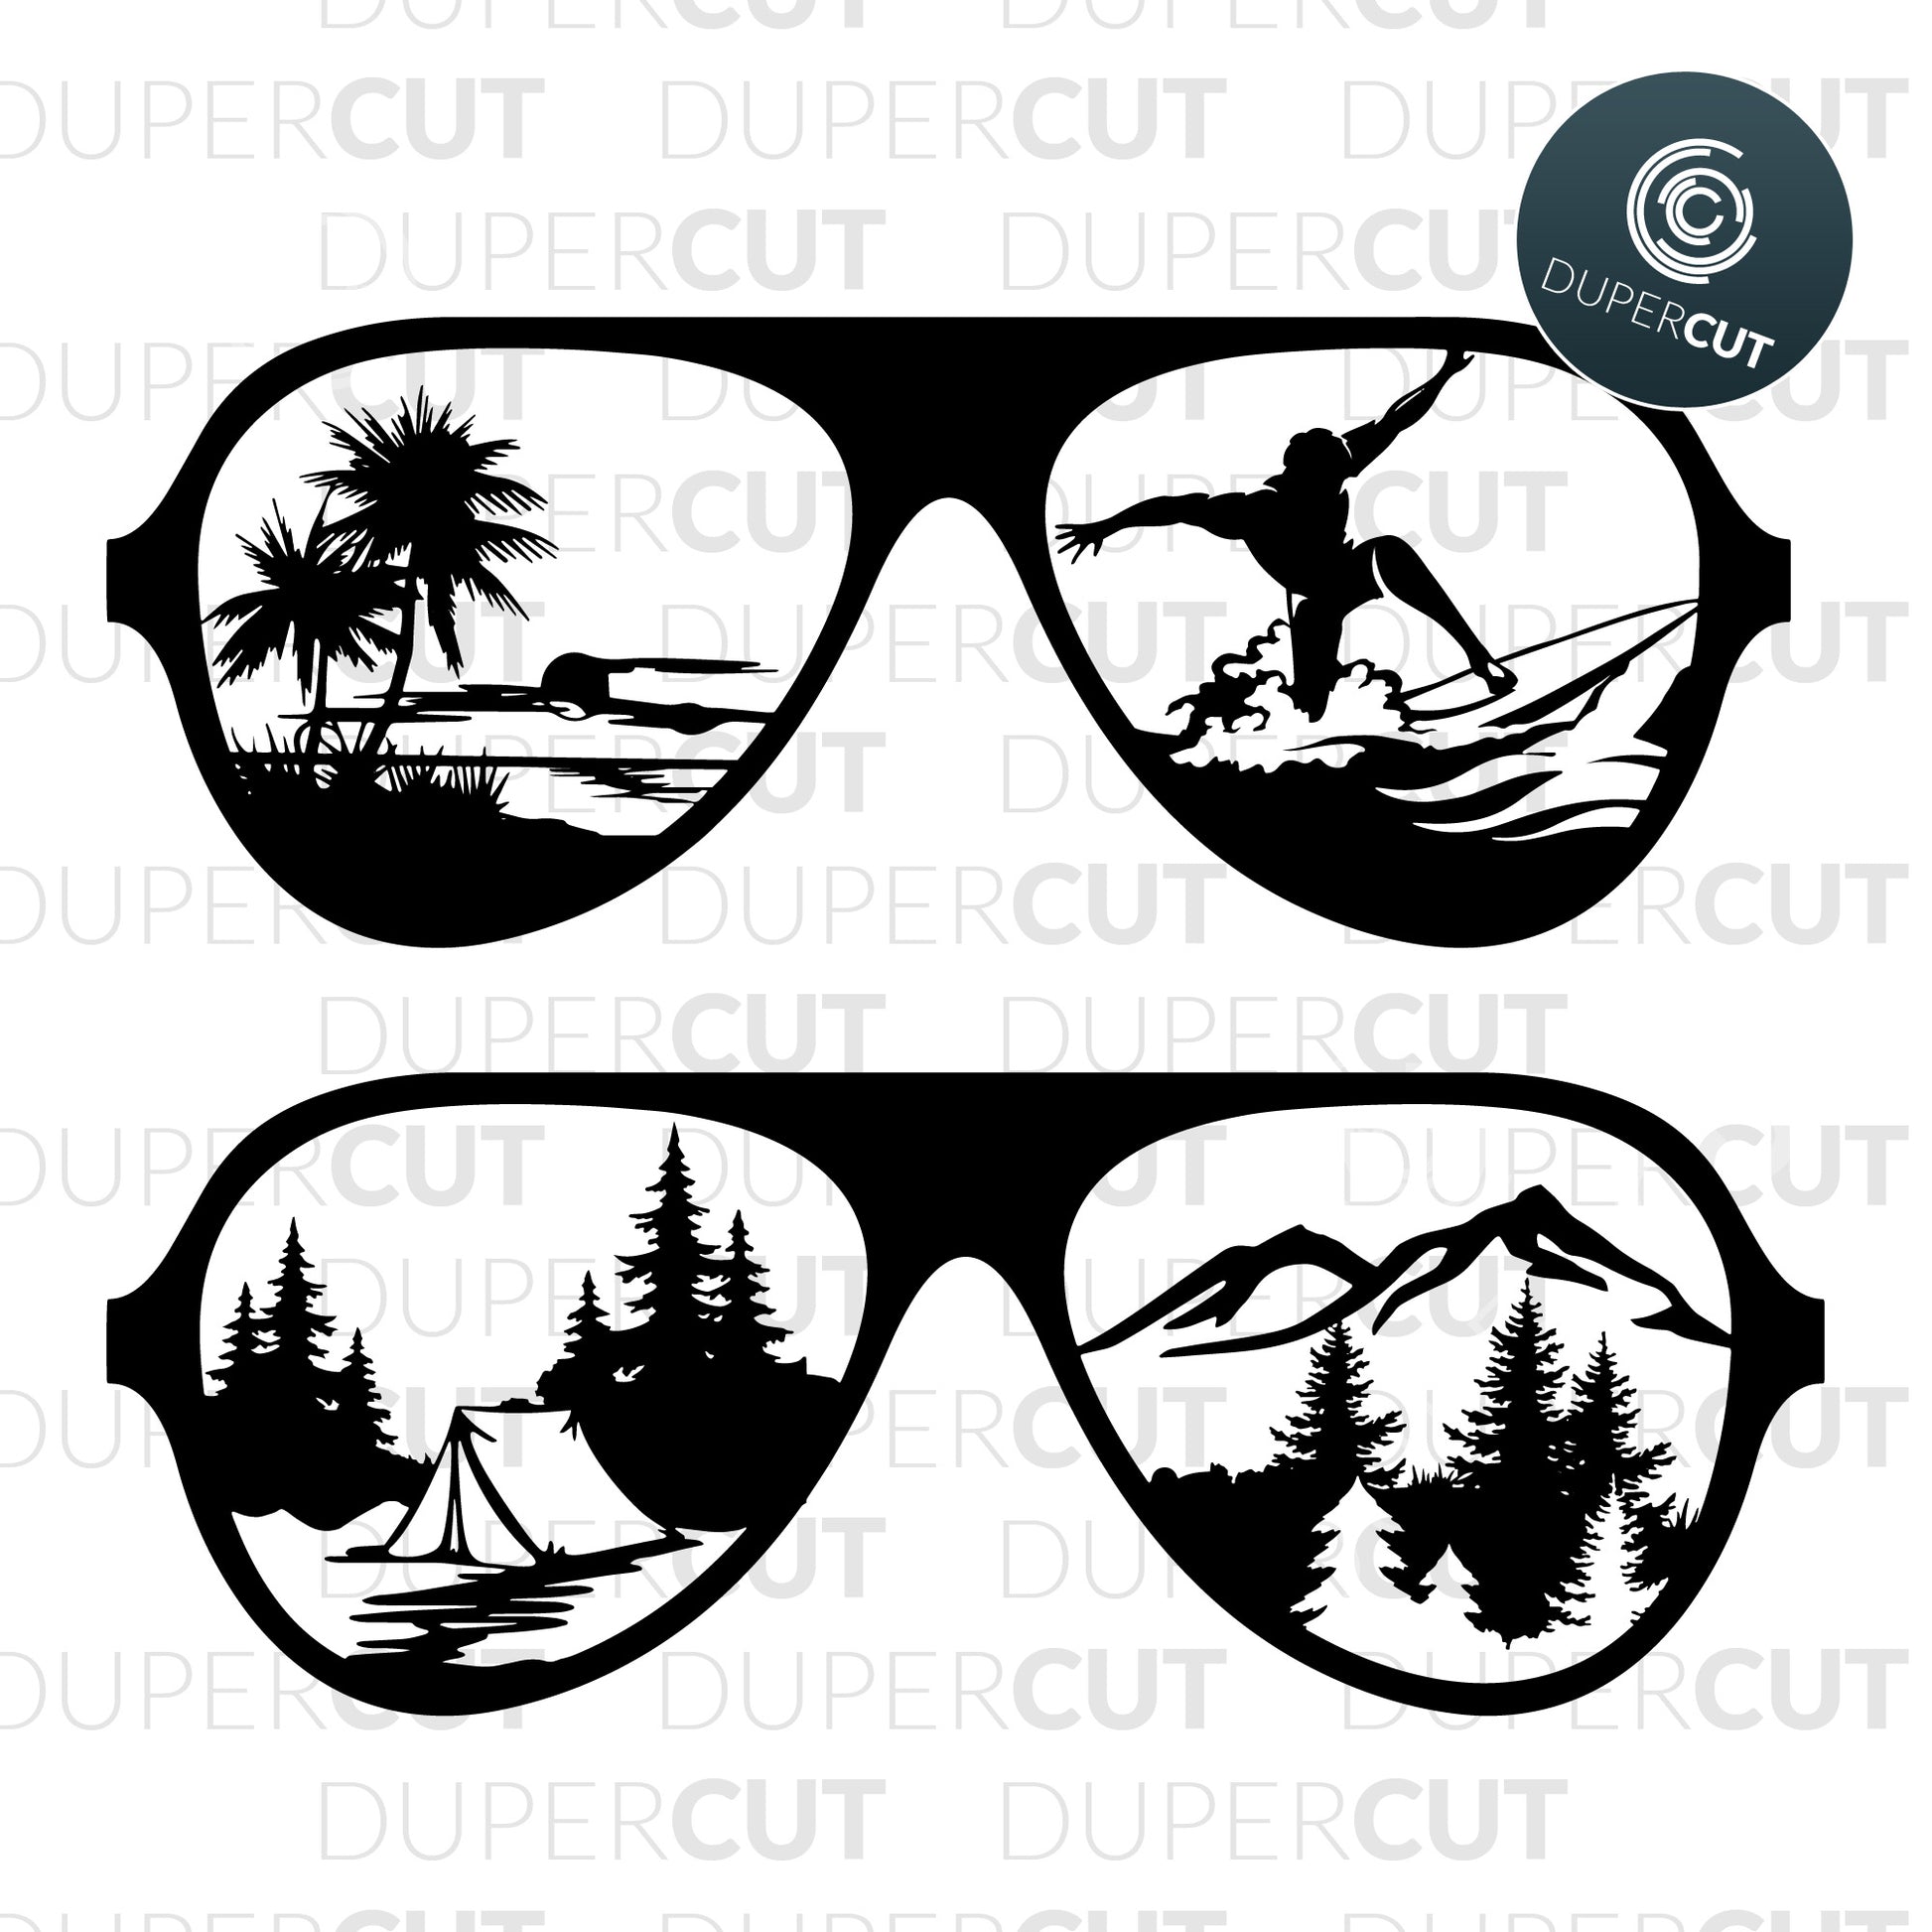 Adventure overlanding sunglasses template  - SVG DXF JPEG files for CNC machines, laser cutting, Cricut, Silhouette Cameo, Glowforge engraving